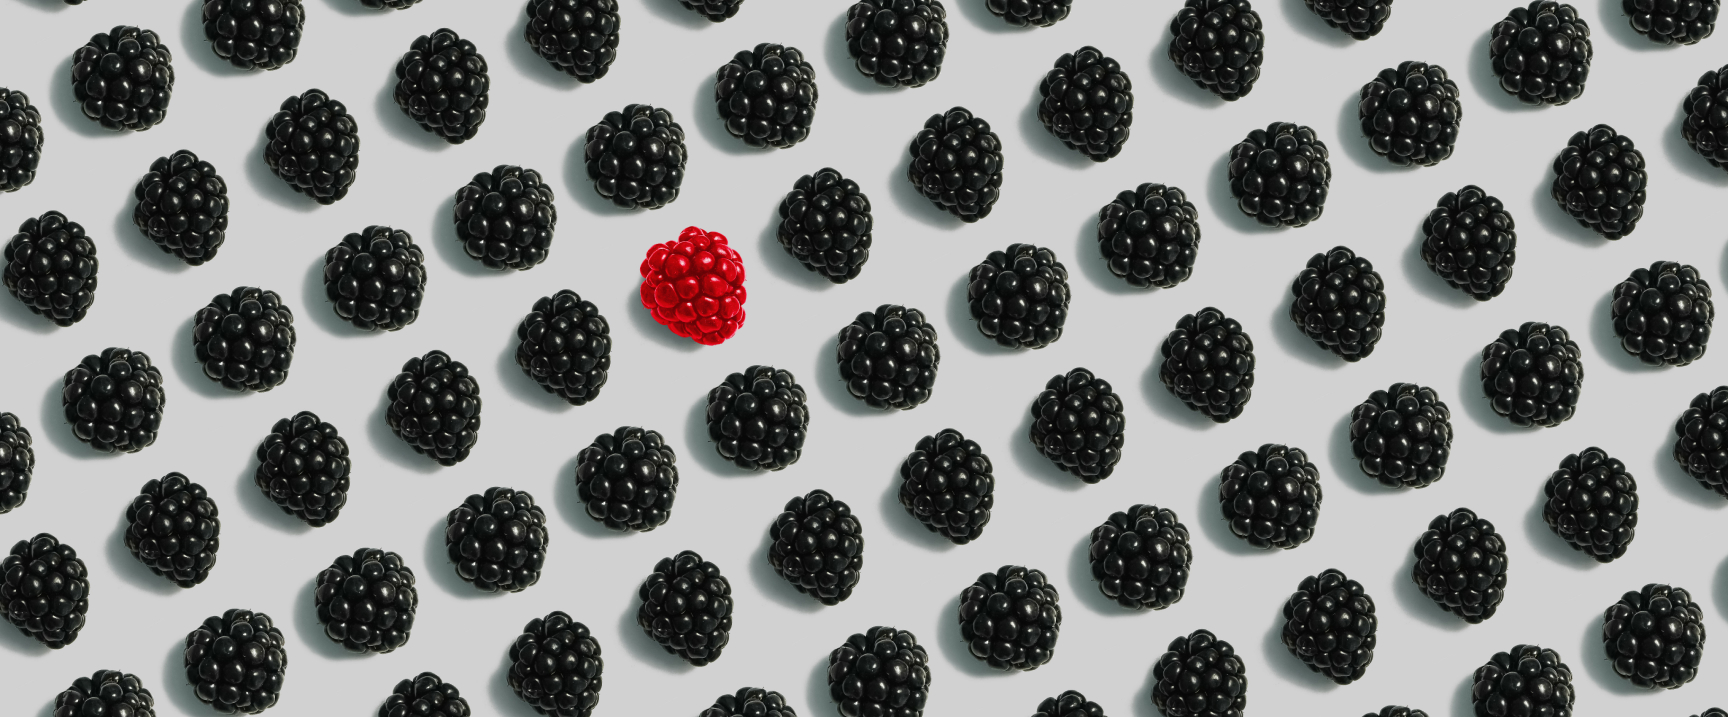 black berries and one red berry